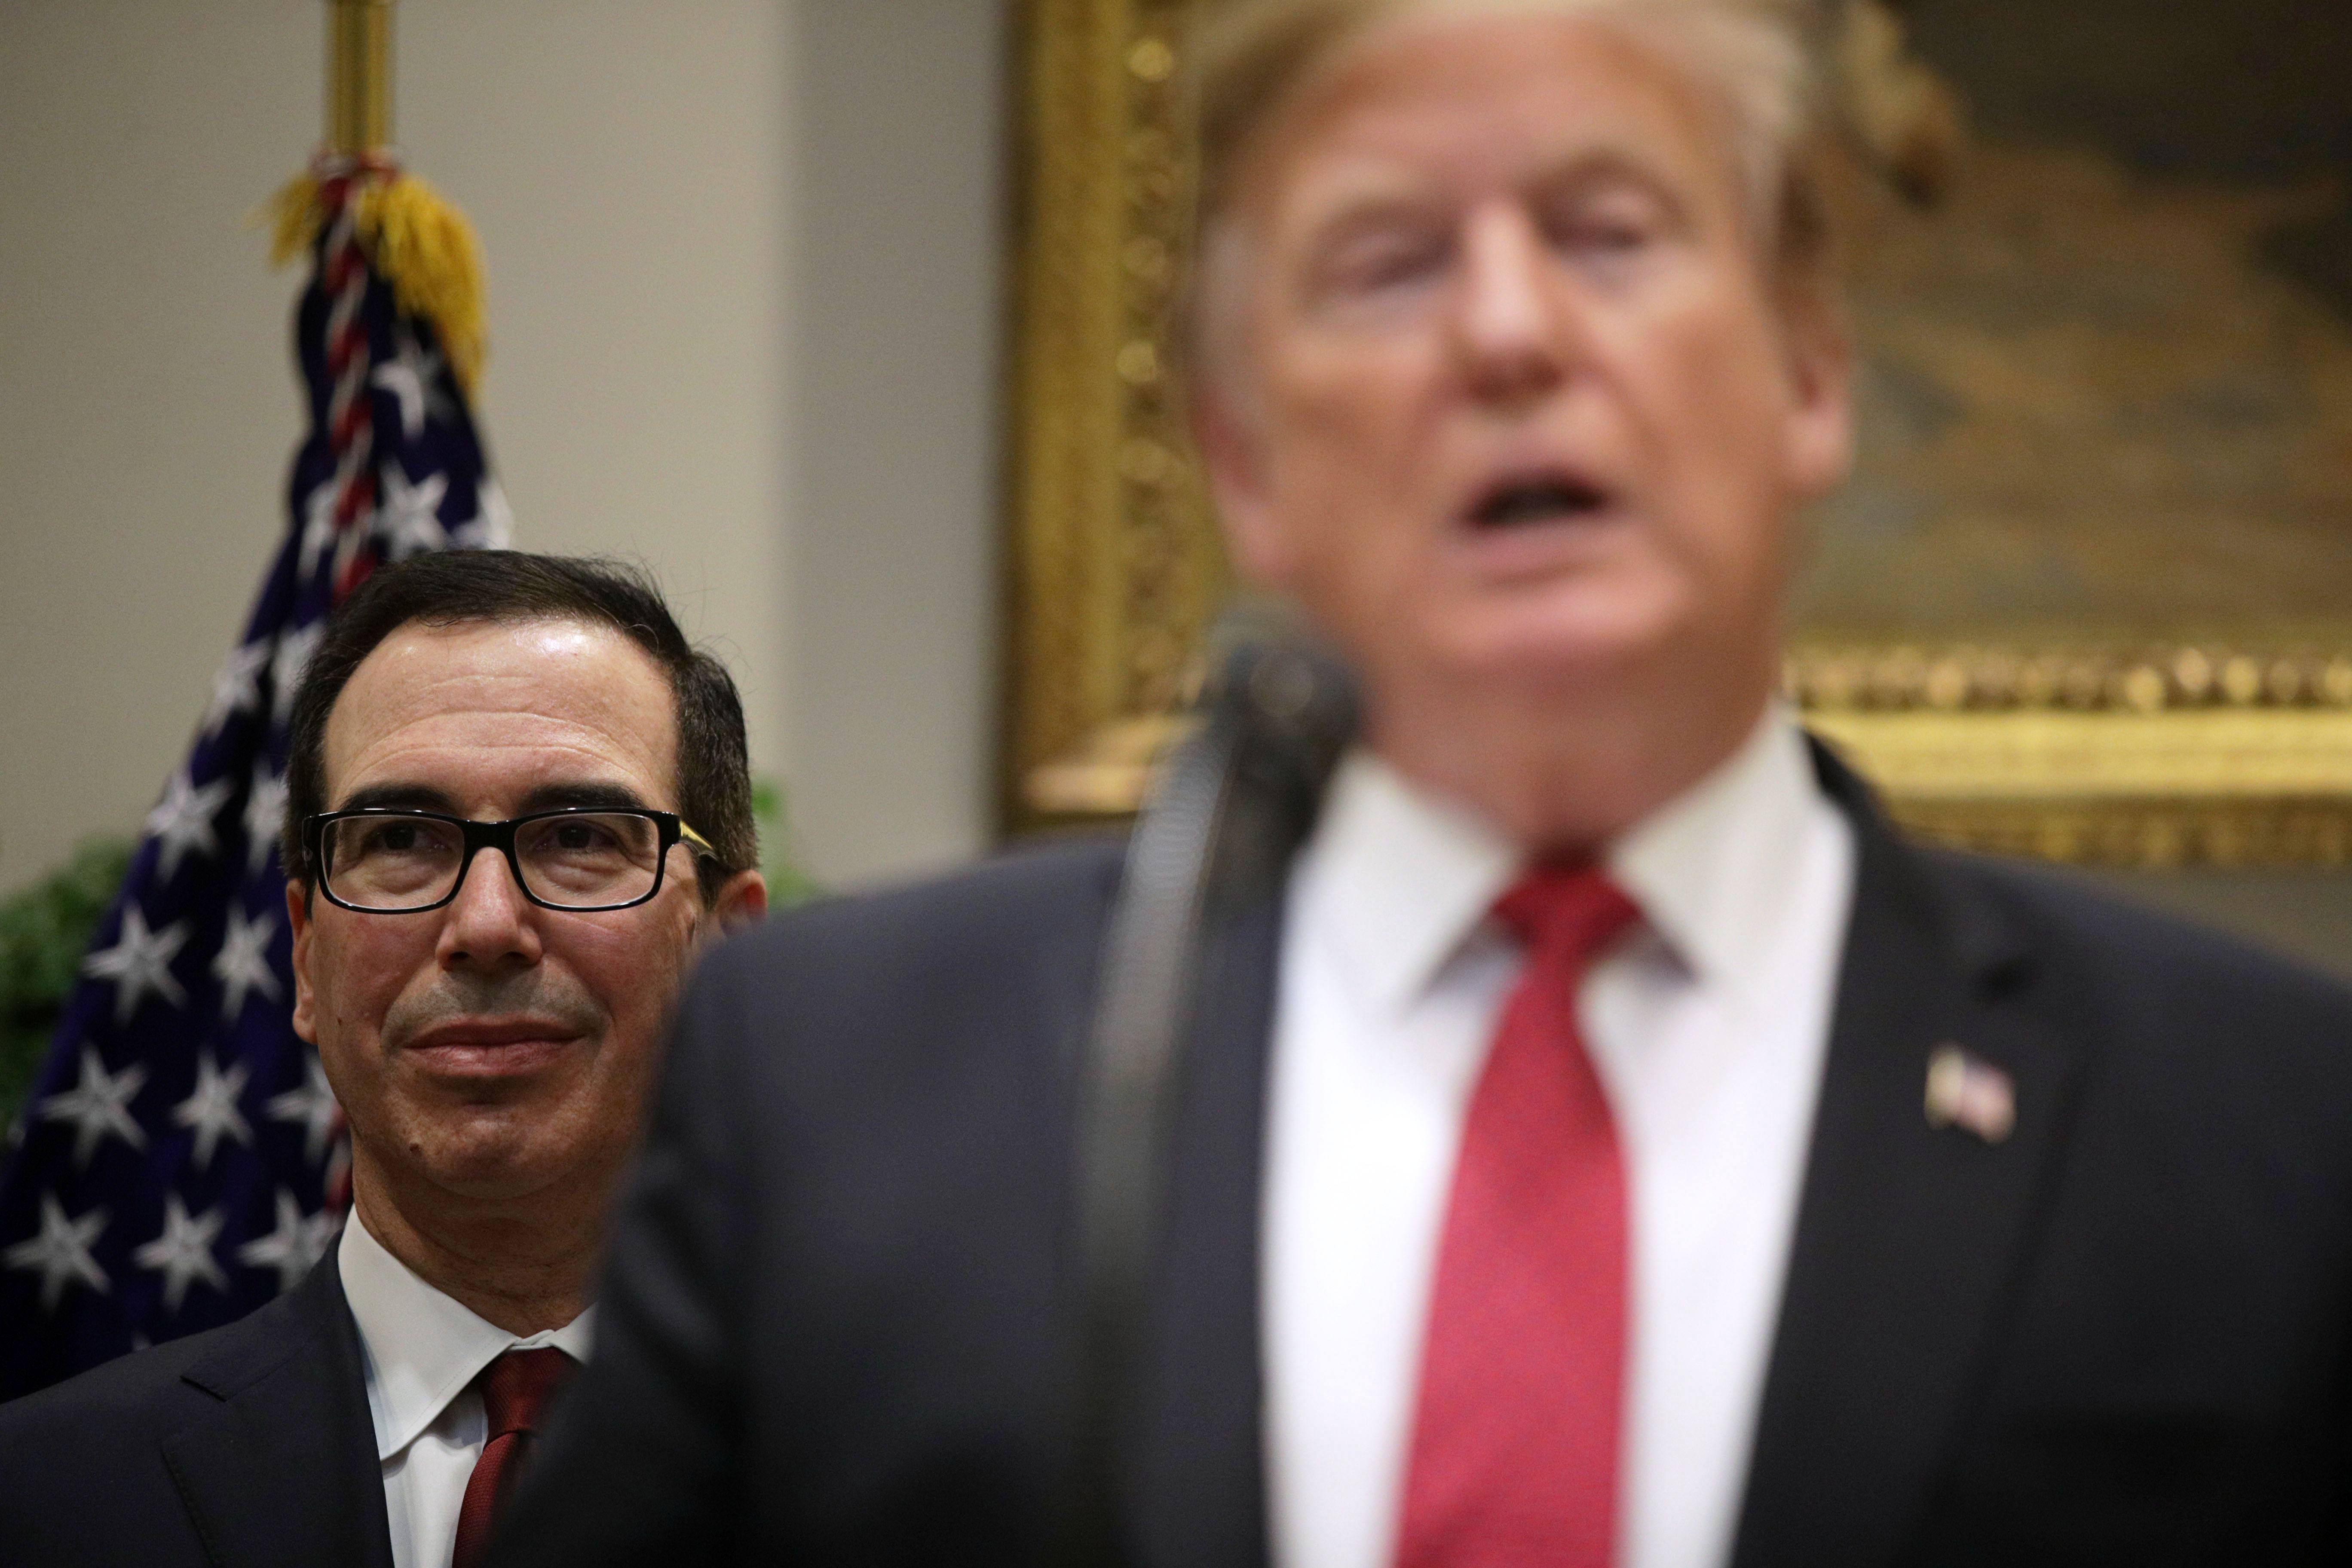 WASHINGTON, DC - FEBRUARY 06: (AFP-OUT) U.S. President Donald Trump speaks as Secretary of the Treasury Steven Mnuchin (L) listens during a Roosevelt Room event at the White House February 6, 2019 in Washington, DC. President Trump announced that Under Secretary of the Treasury for International Affairs David Malpass will be the U.S. candidate for election as the next president of the World Bank. (Photo by Alex Wong/Getty Images)